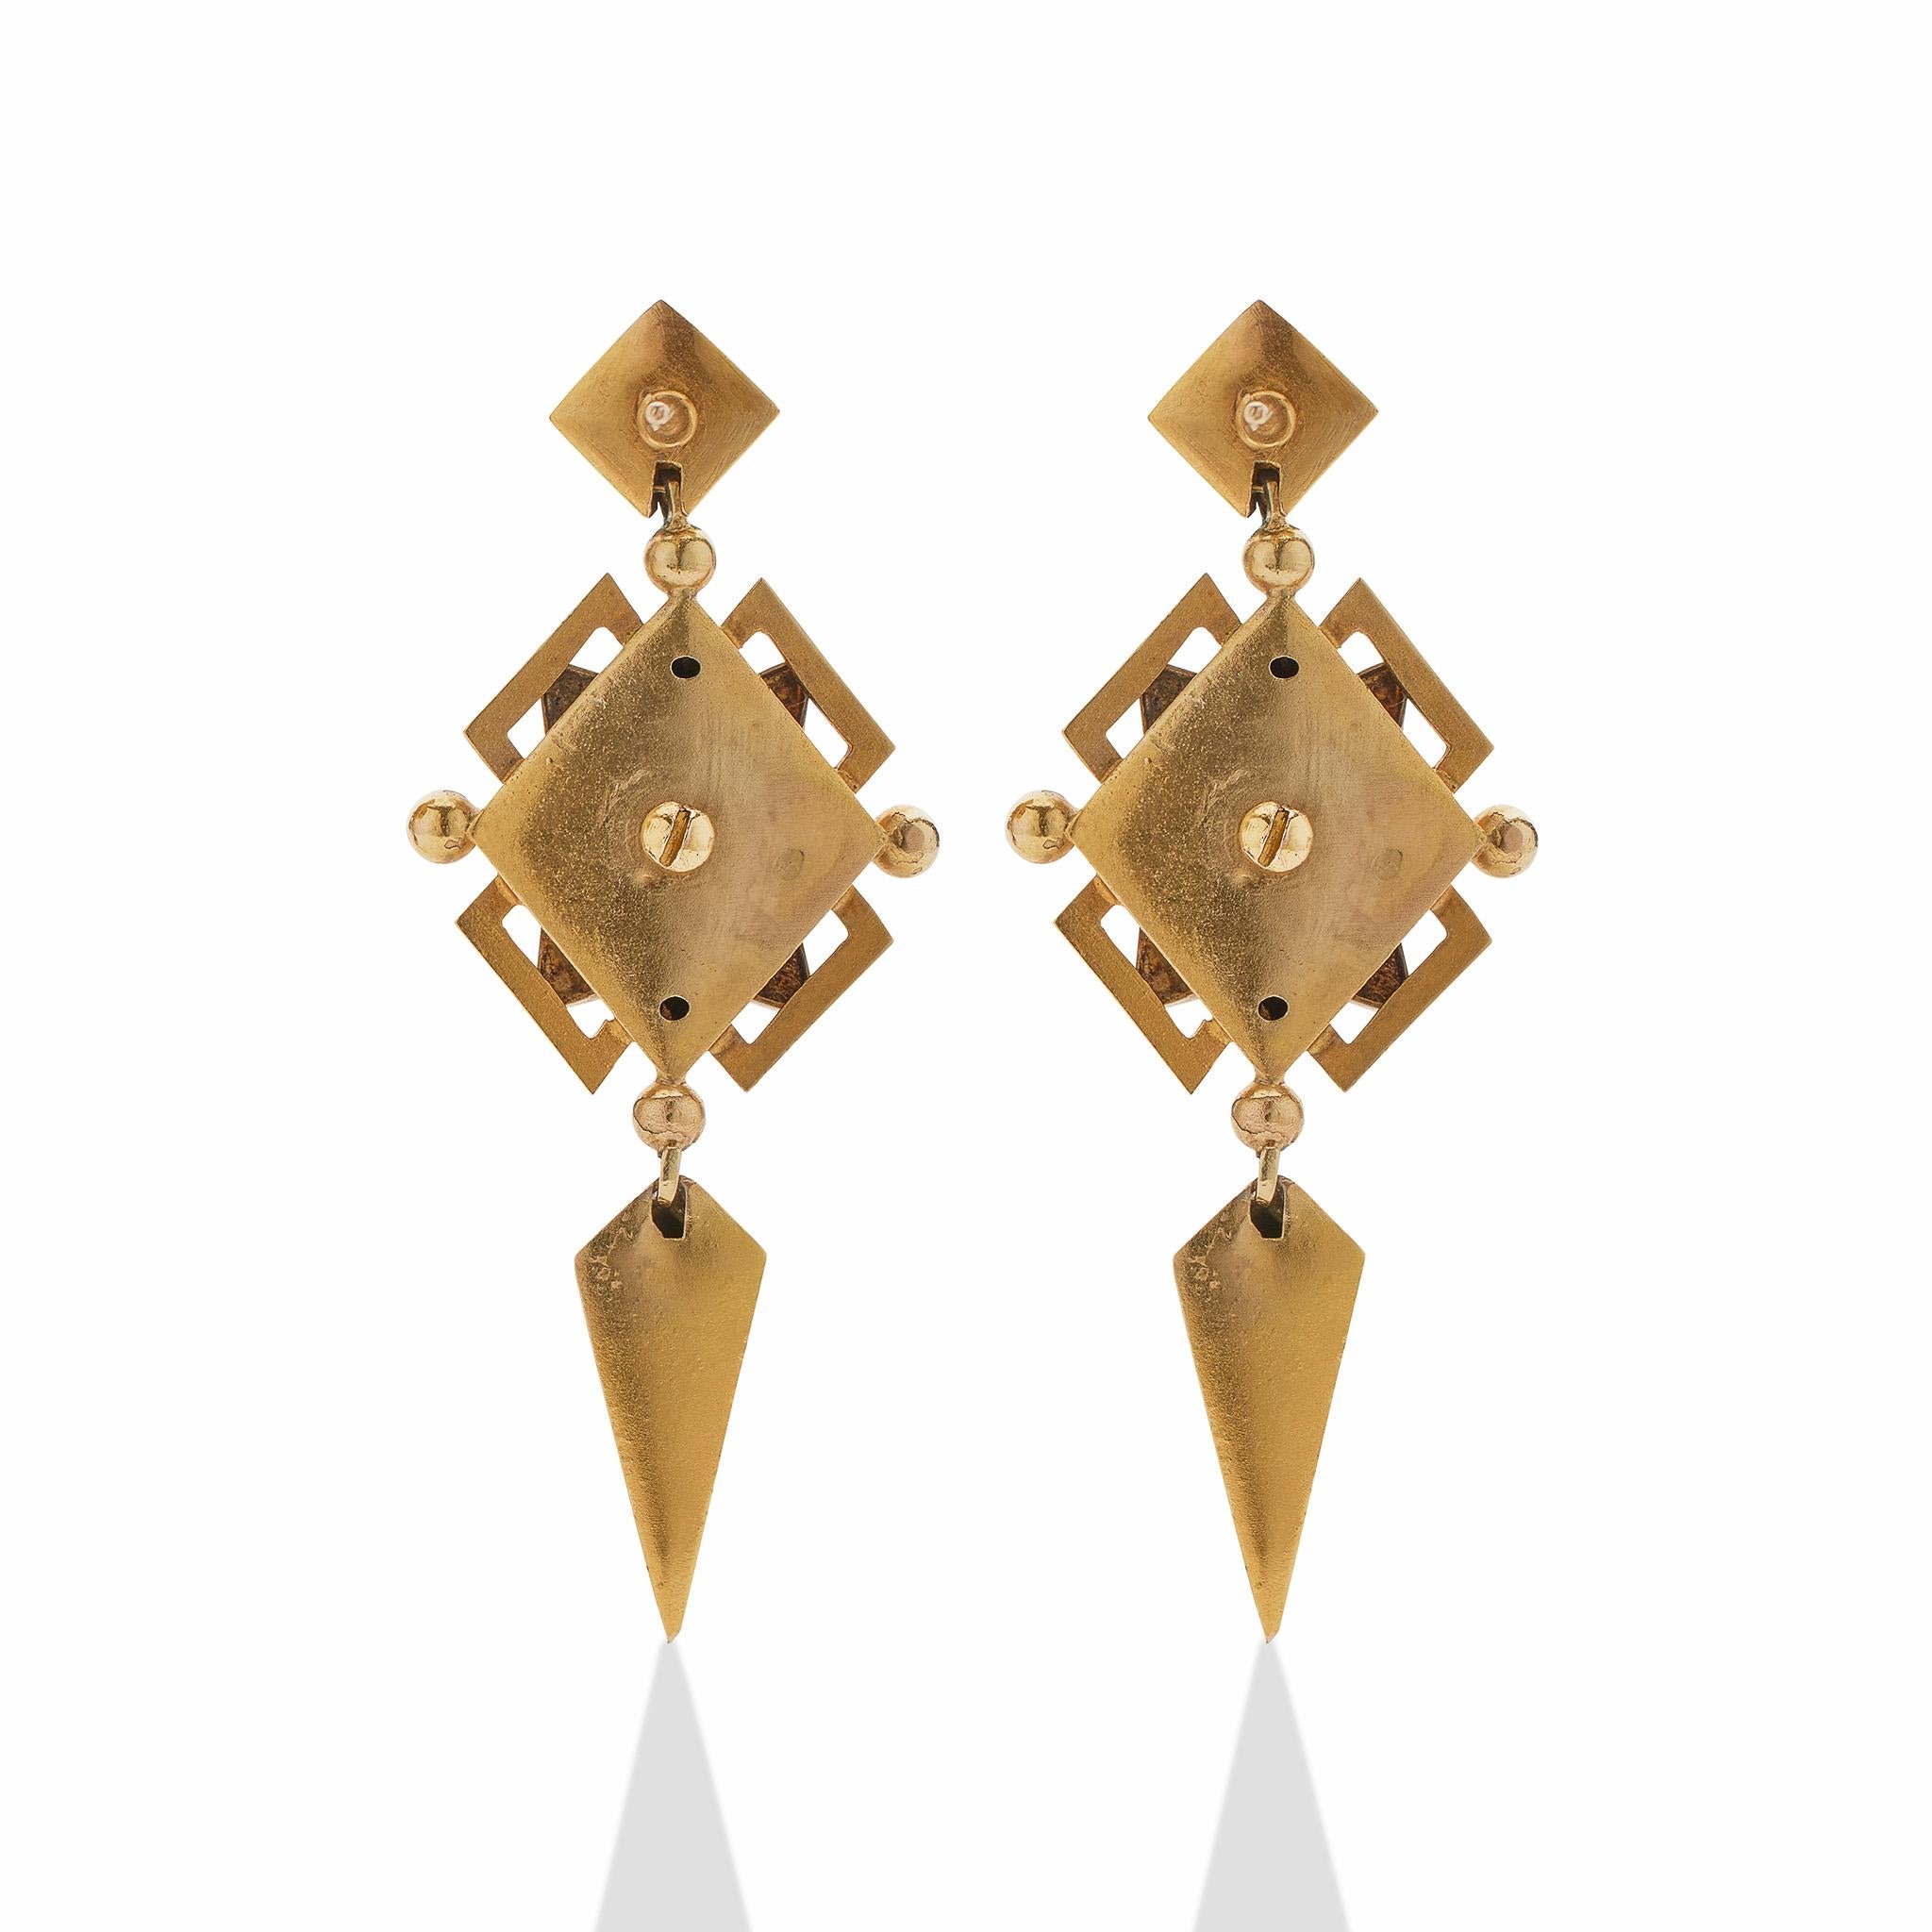 Created in the 1860s, these long antique pendant earrings are composed of 18K gold, enamel and split seed pearls. Each is designed as a navette-shaped top enclosing a hemisphere, suspending flexibly-set stepped, open, and interlocking oval, navette,